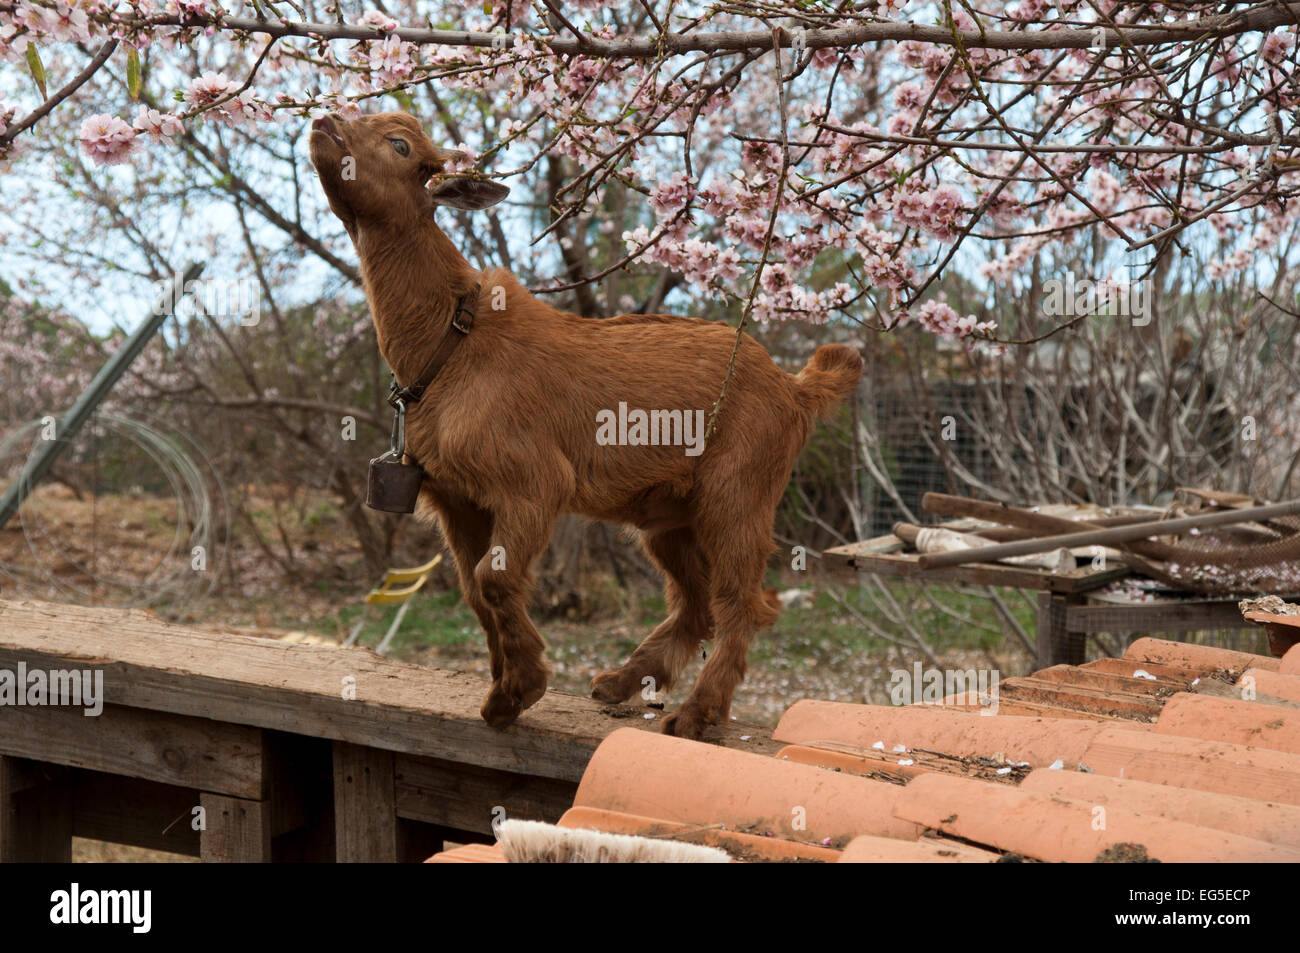 A young goat is feeding in the flowering Almond trees on La Palma, one of the Canary Islands.  Eine kleine Ziege knabbert Blüten Stock Photo